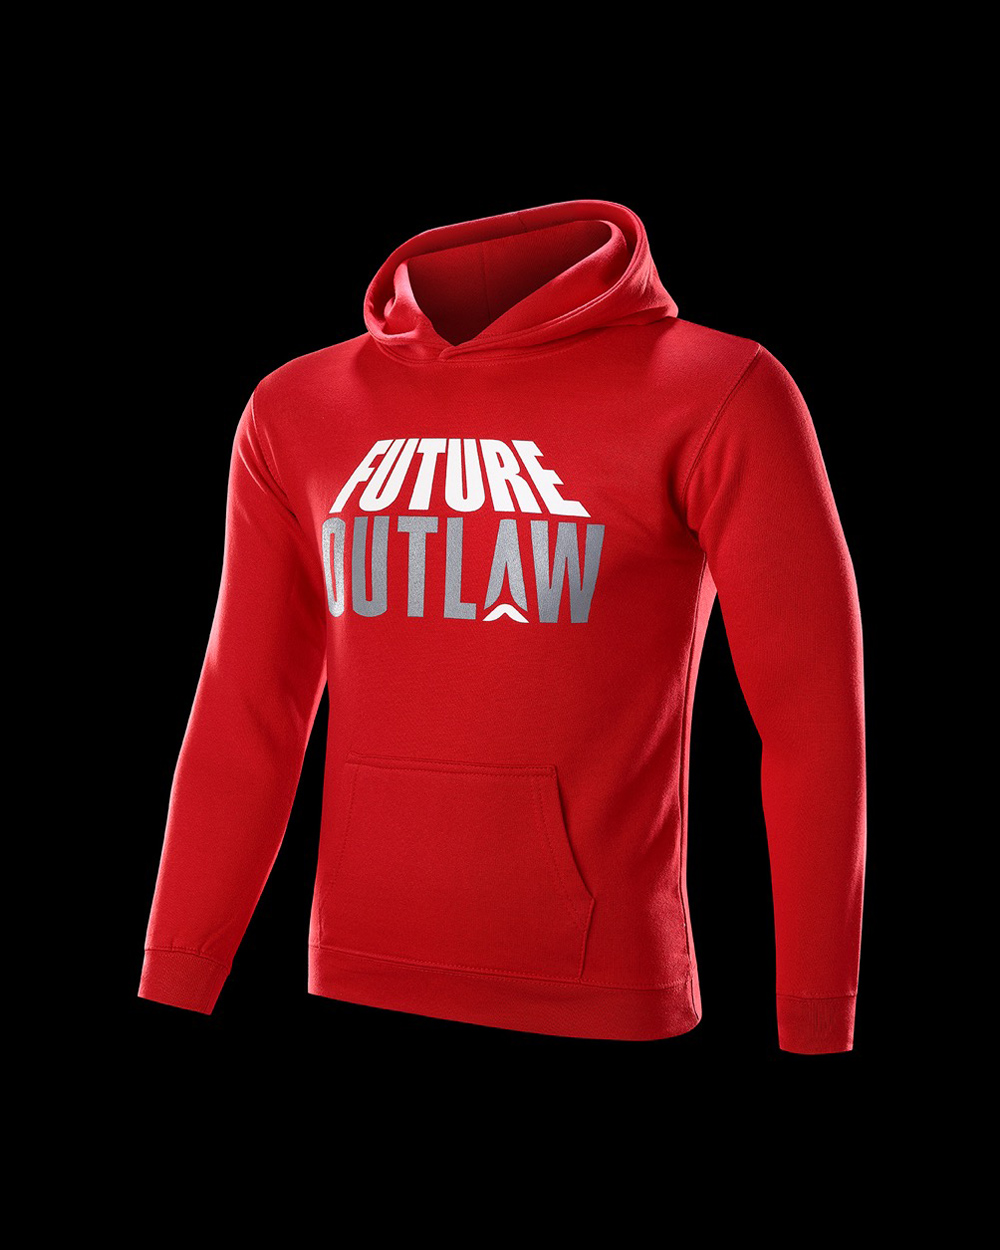 Future Outlaw Kids Red Hoodie